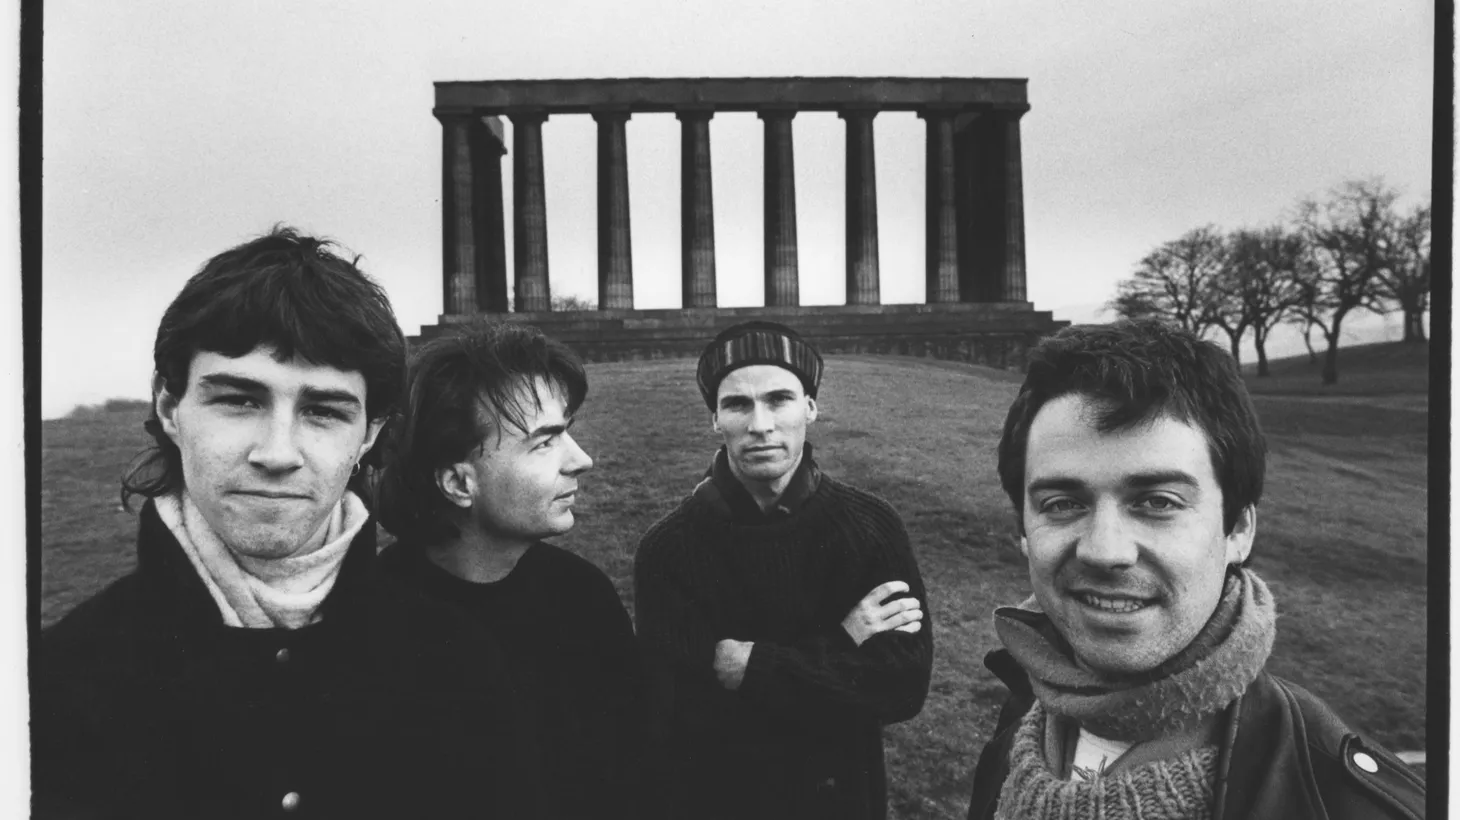 The Chills in 1990, with Martin Phillipps at far right.